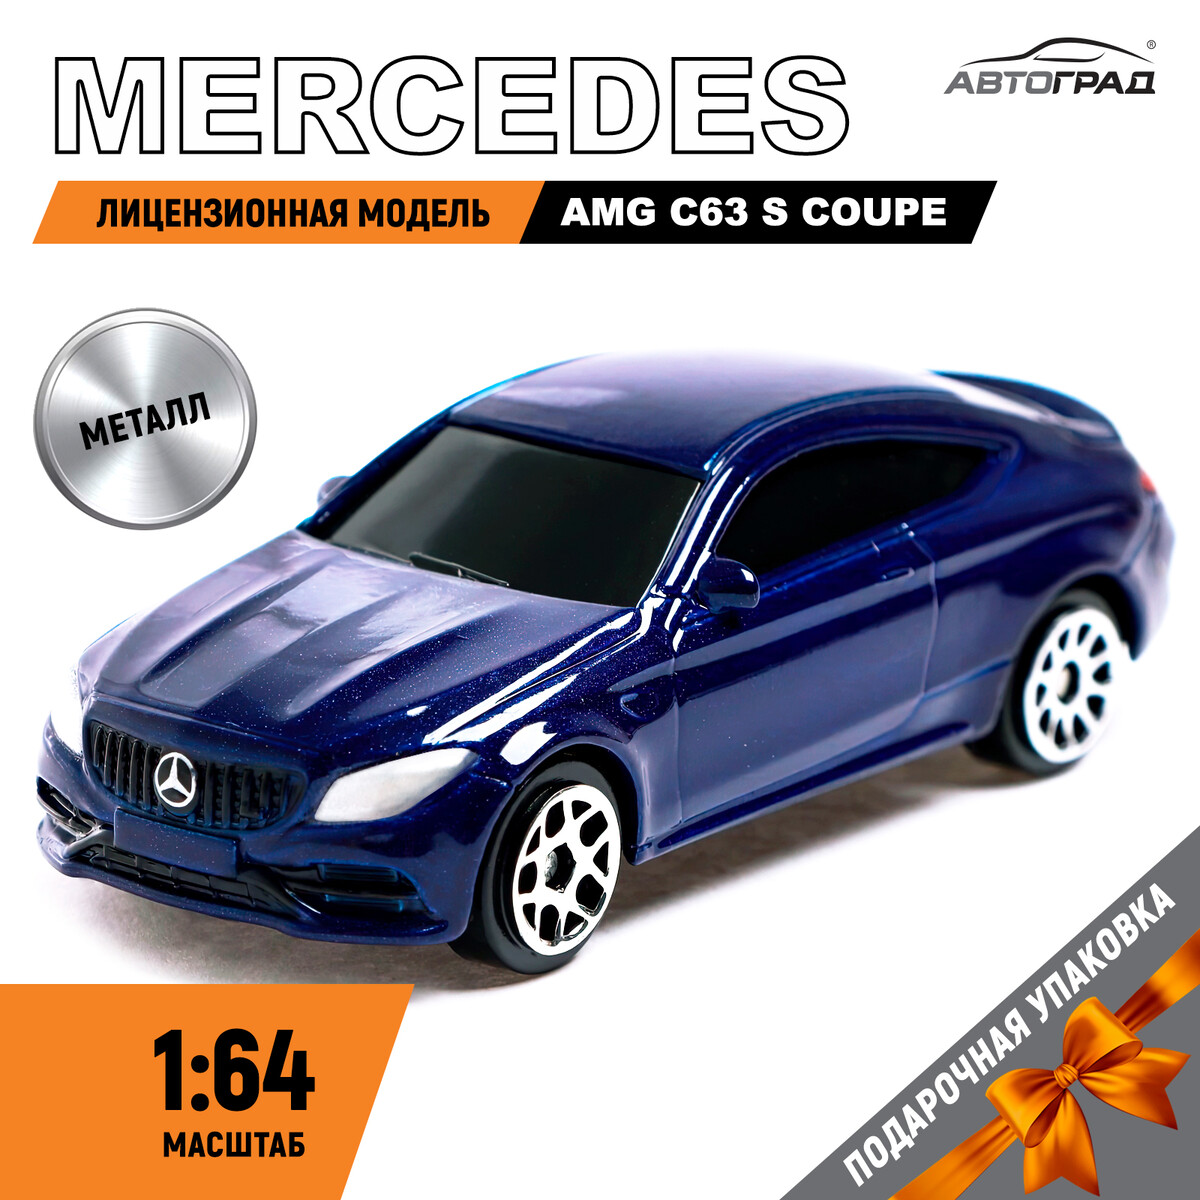   mercedes-amg c63 s coupe, 1:64,  